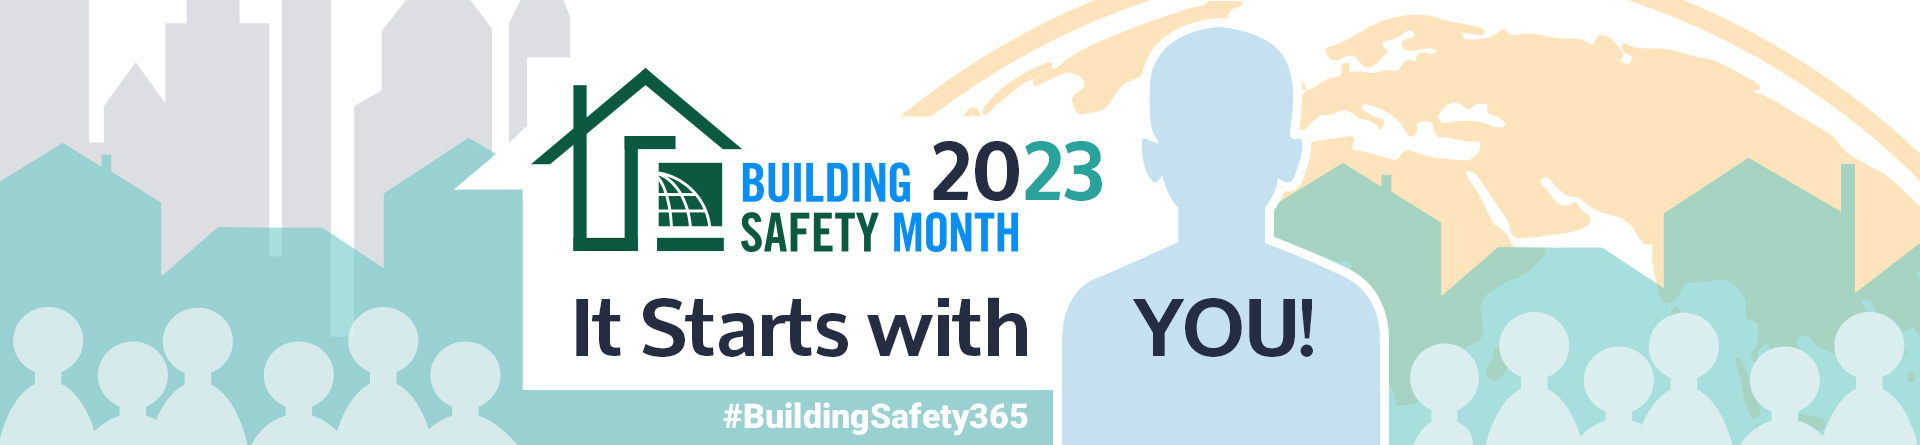 2023 Building Safety Month